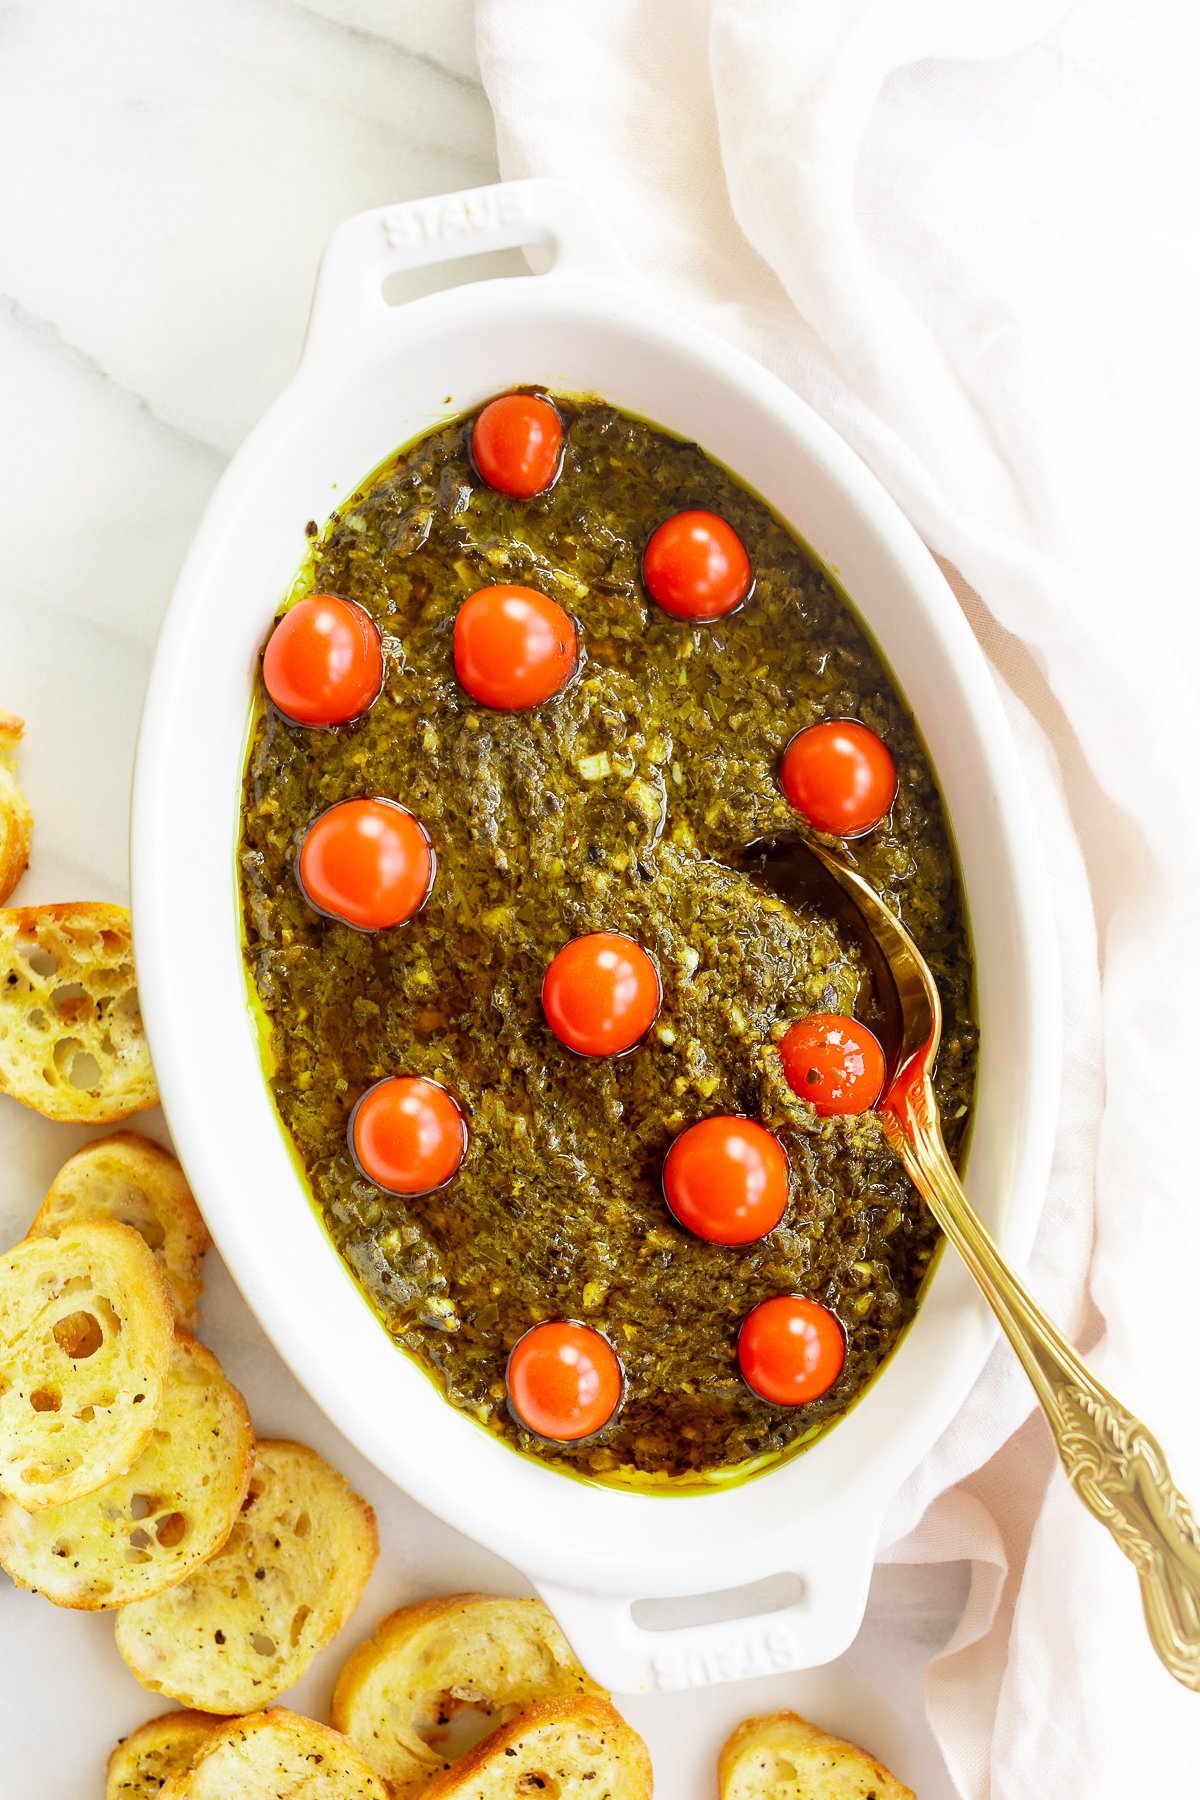 An easy appetizer dip; a white bowl of pesto dip with tomatoes and bread.